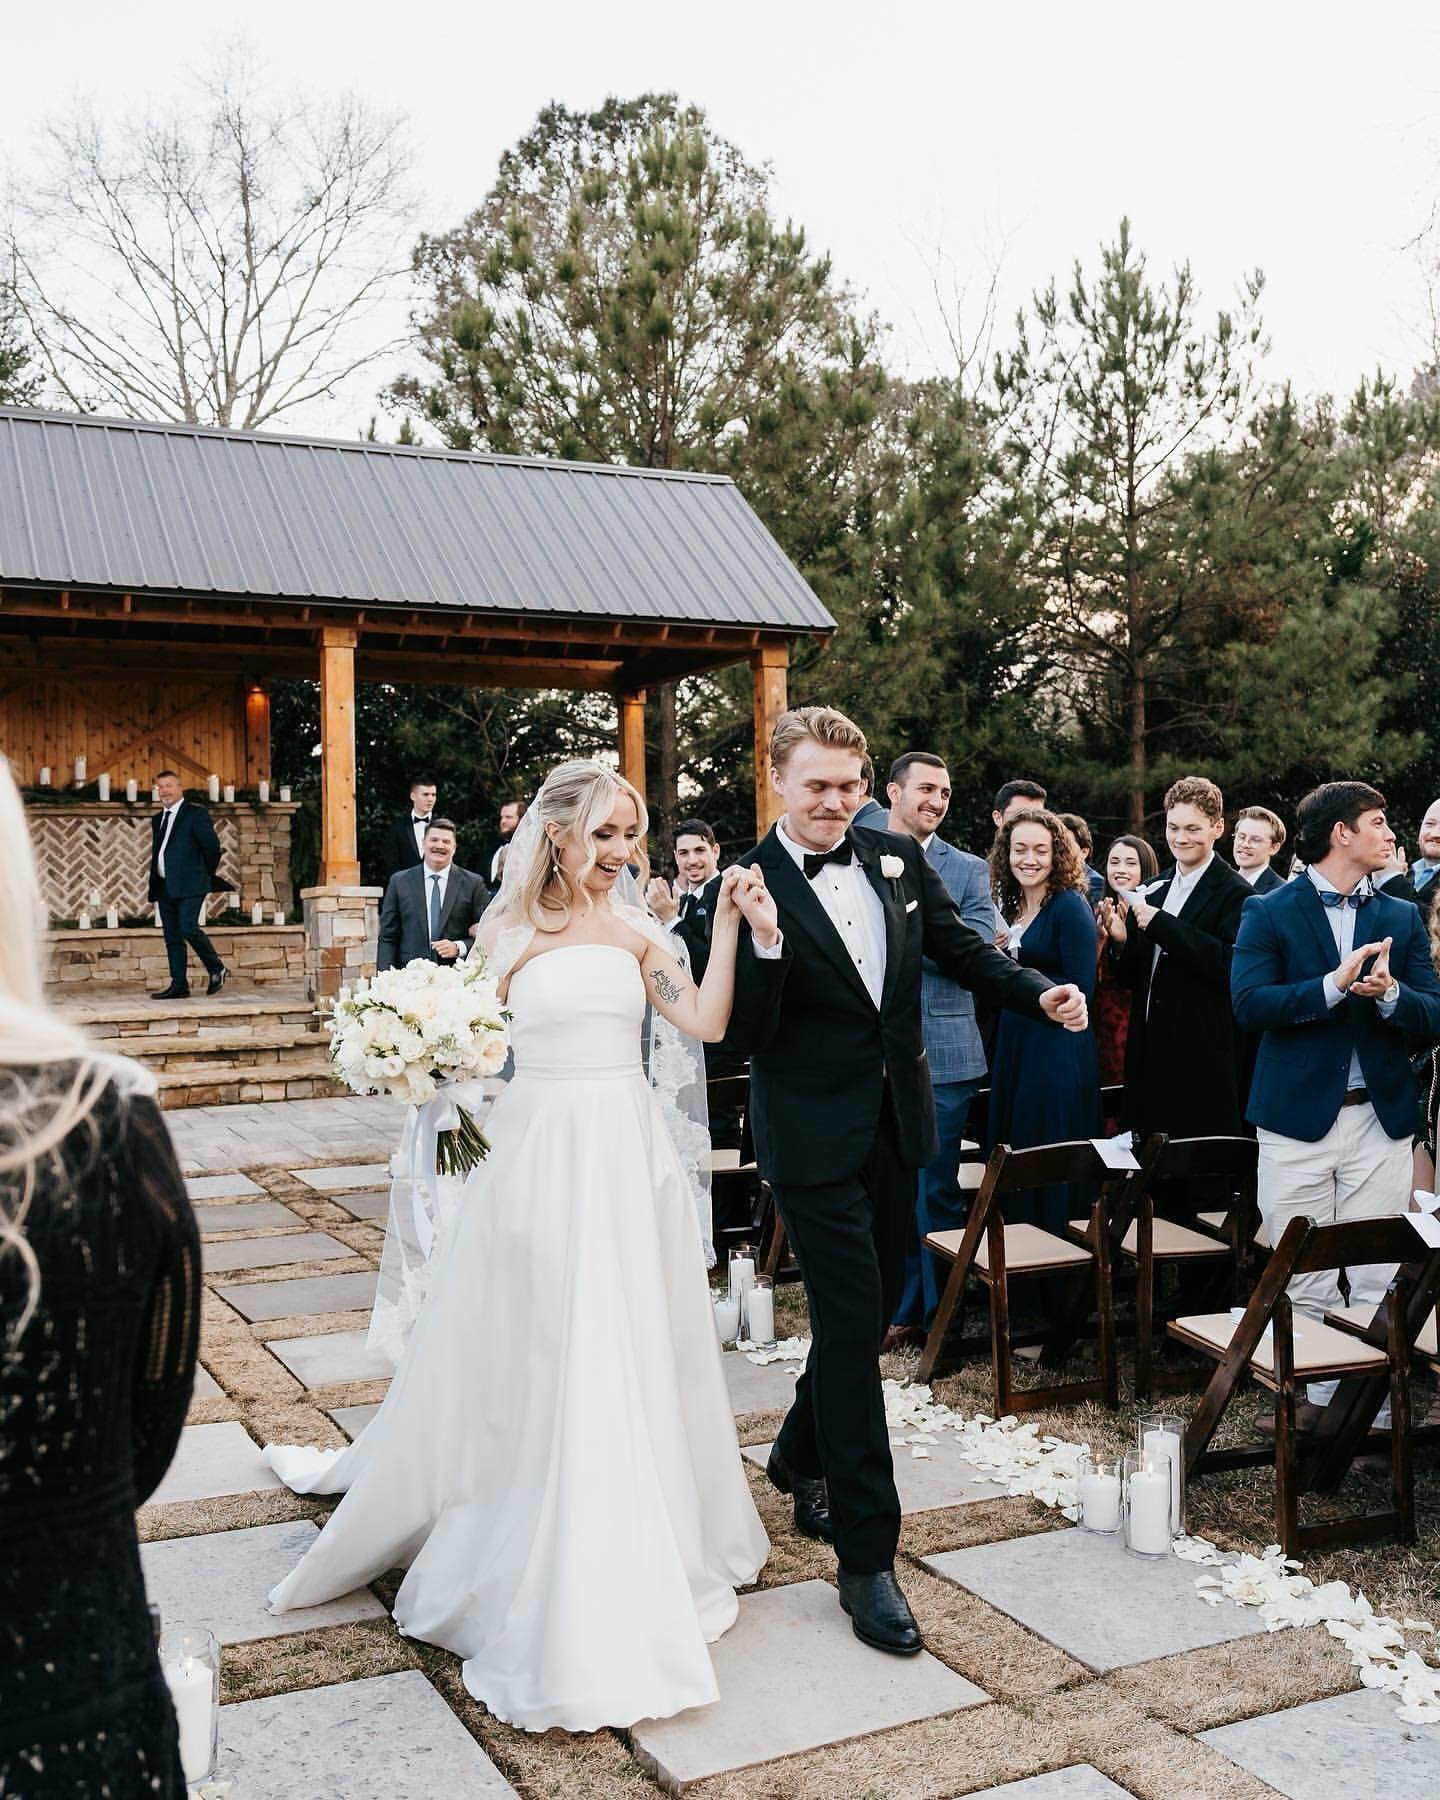 The actual best feeling in the world.
Come say &rdquo;I do!&rdquo; at Vinewood Stables, where making all of your dreams come true is our favorite thing to do! Link in bio to schedule a tour.

Photo: @allisonrussoalesi.photo
Venue: @vinewoodevents
Ven